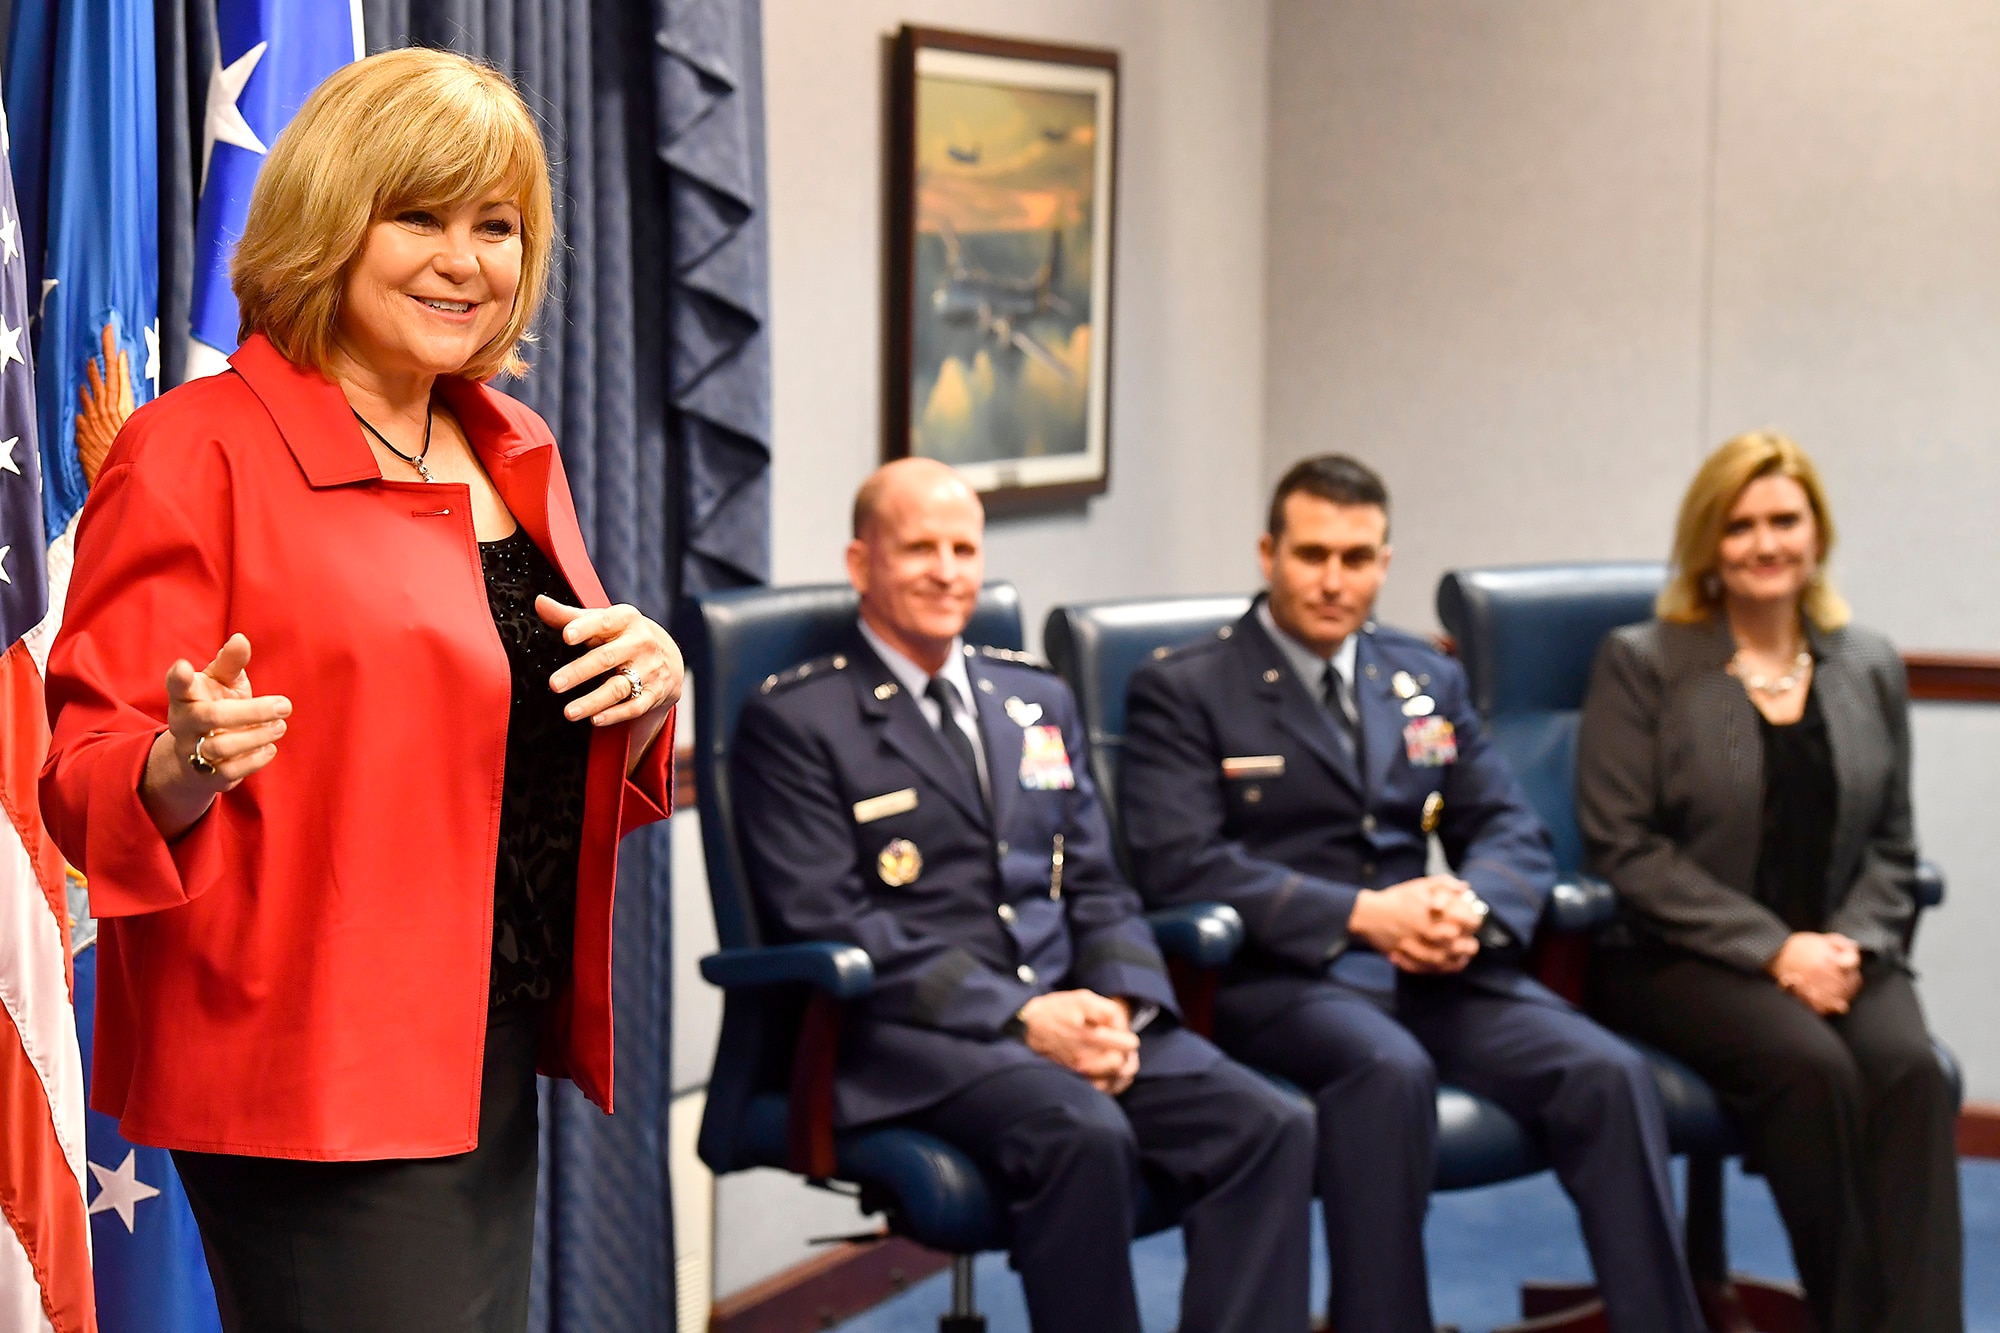 Sharon O'Malley-Burg, daughter of Gen. Jerome O'Malley, helps Gen. Stephen Wilson, the Air Force Vice Chief of Staff, present the 2016 O'Malley Award to Col. John Wagner and his wife, Jennifer, during a Pentagon ceremony, March 7, 2017. The Wagners earned the award for their work at Buckley Air Force Base. Colo. (U.S. Air Force photo/Scott M. Ash)